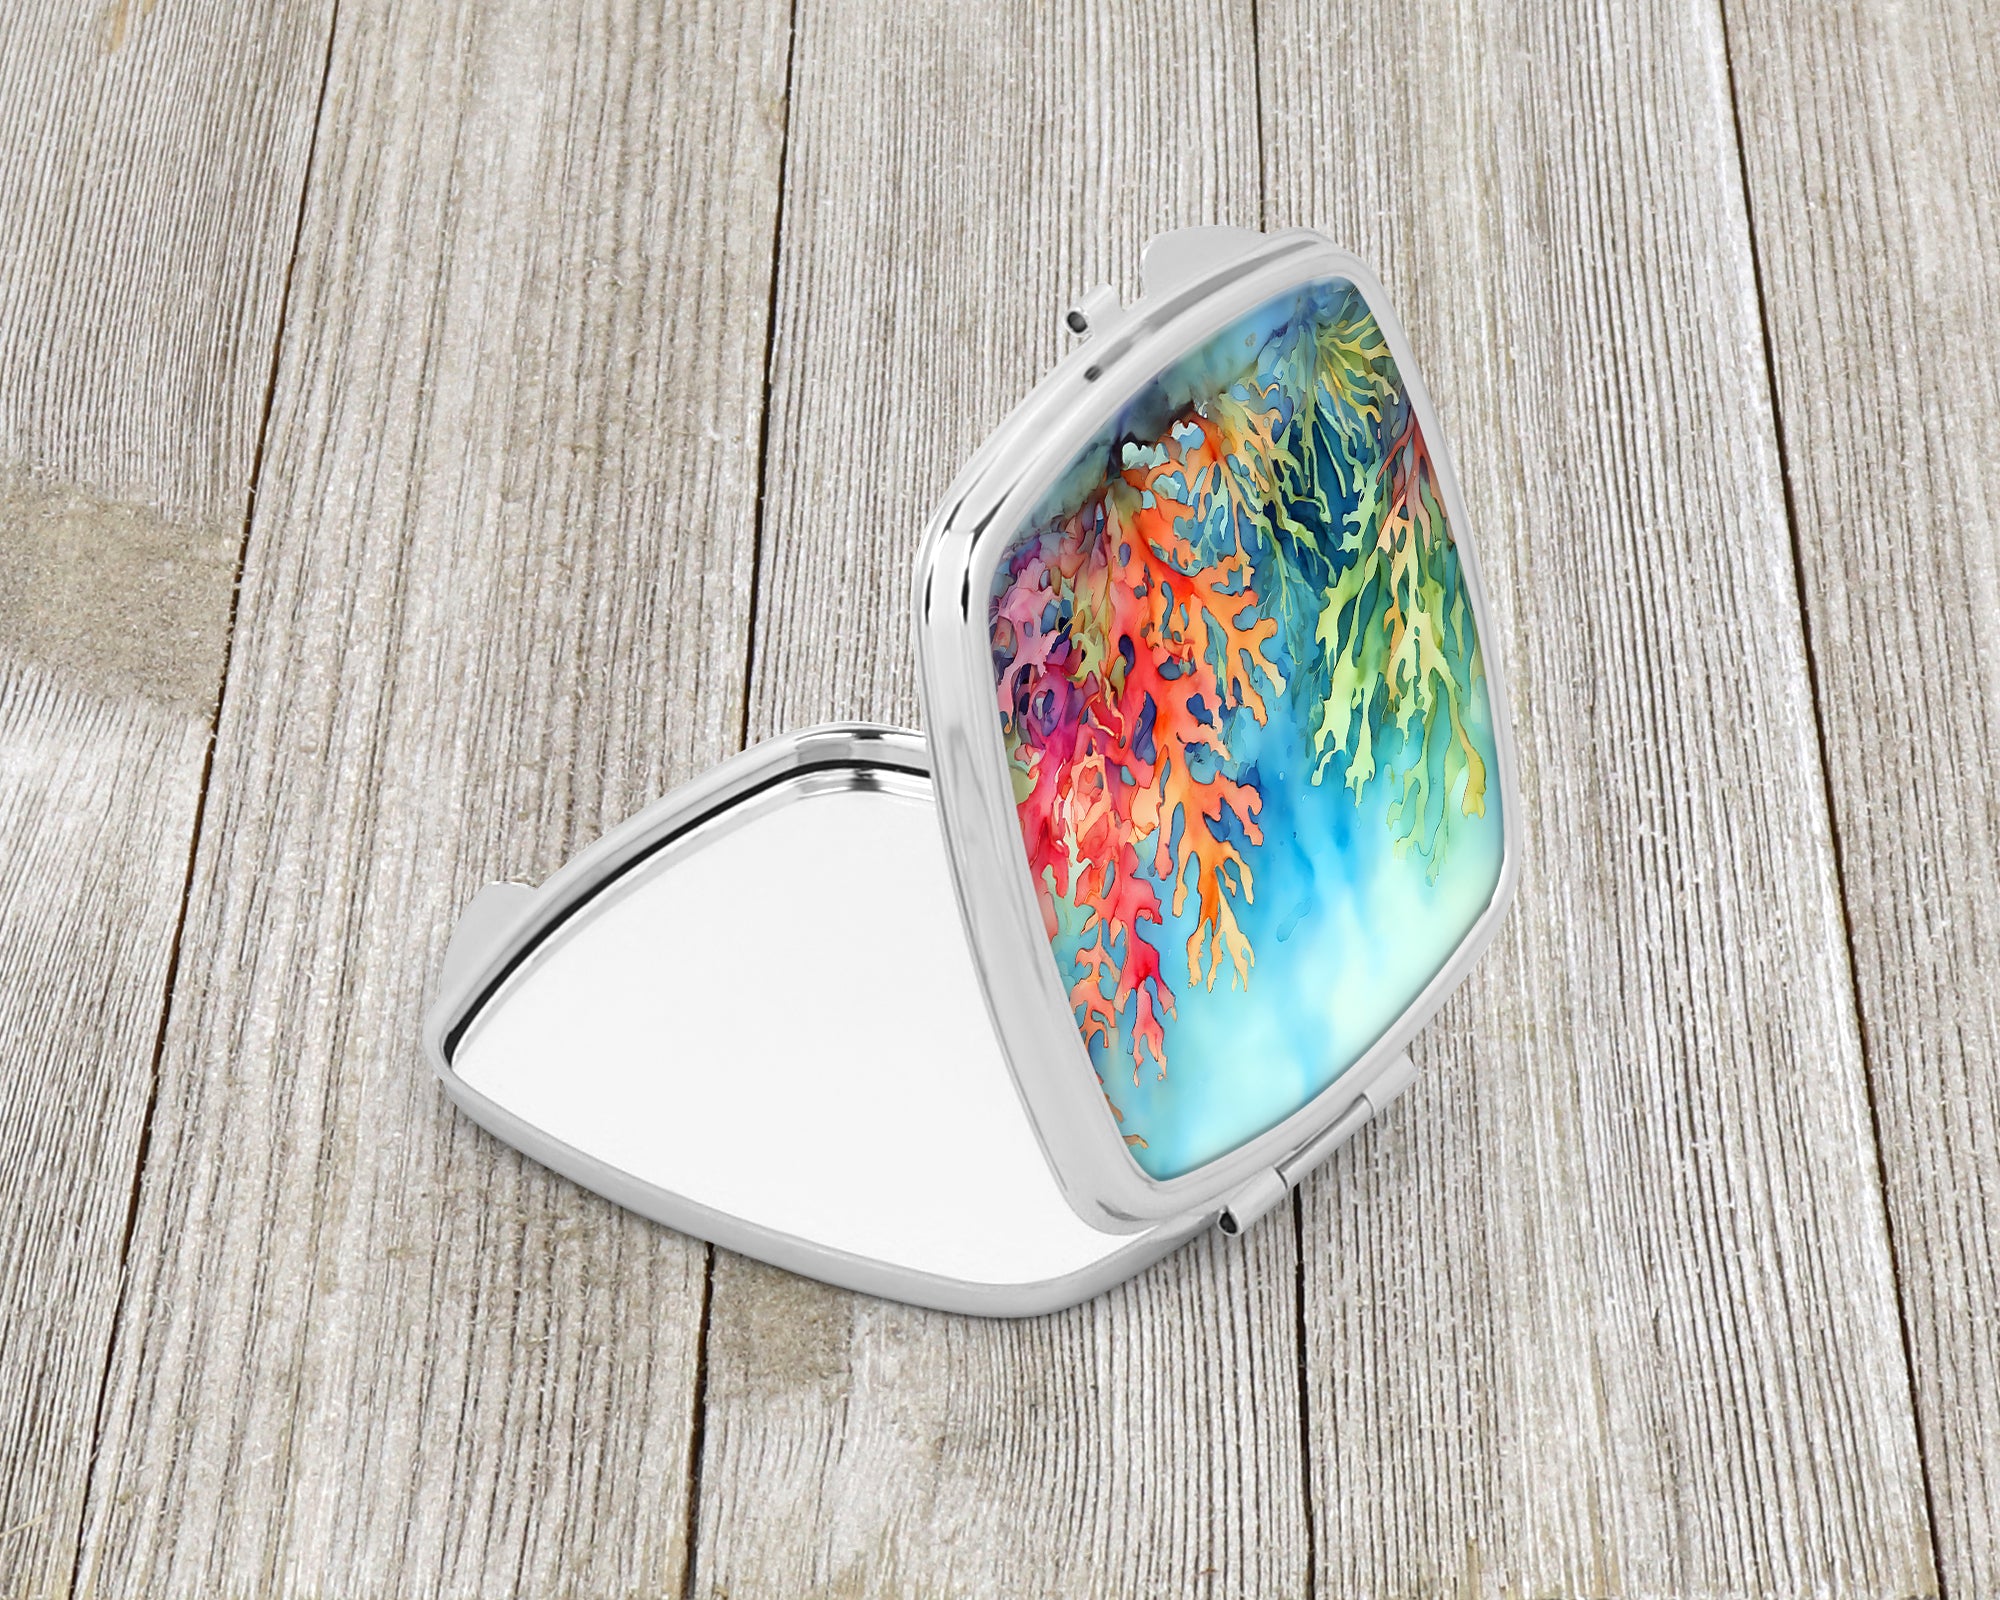 Buy this Seaweed Compact Mirror